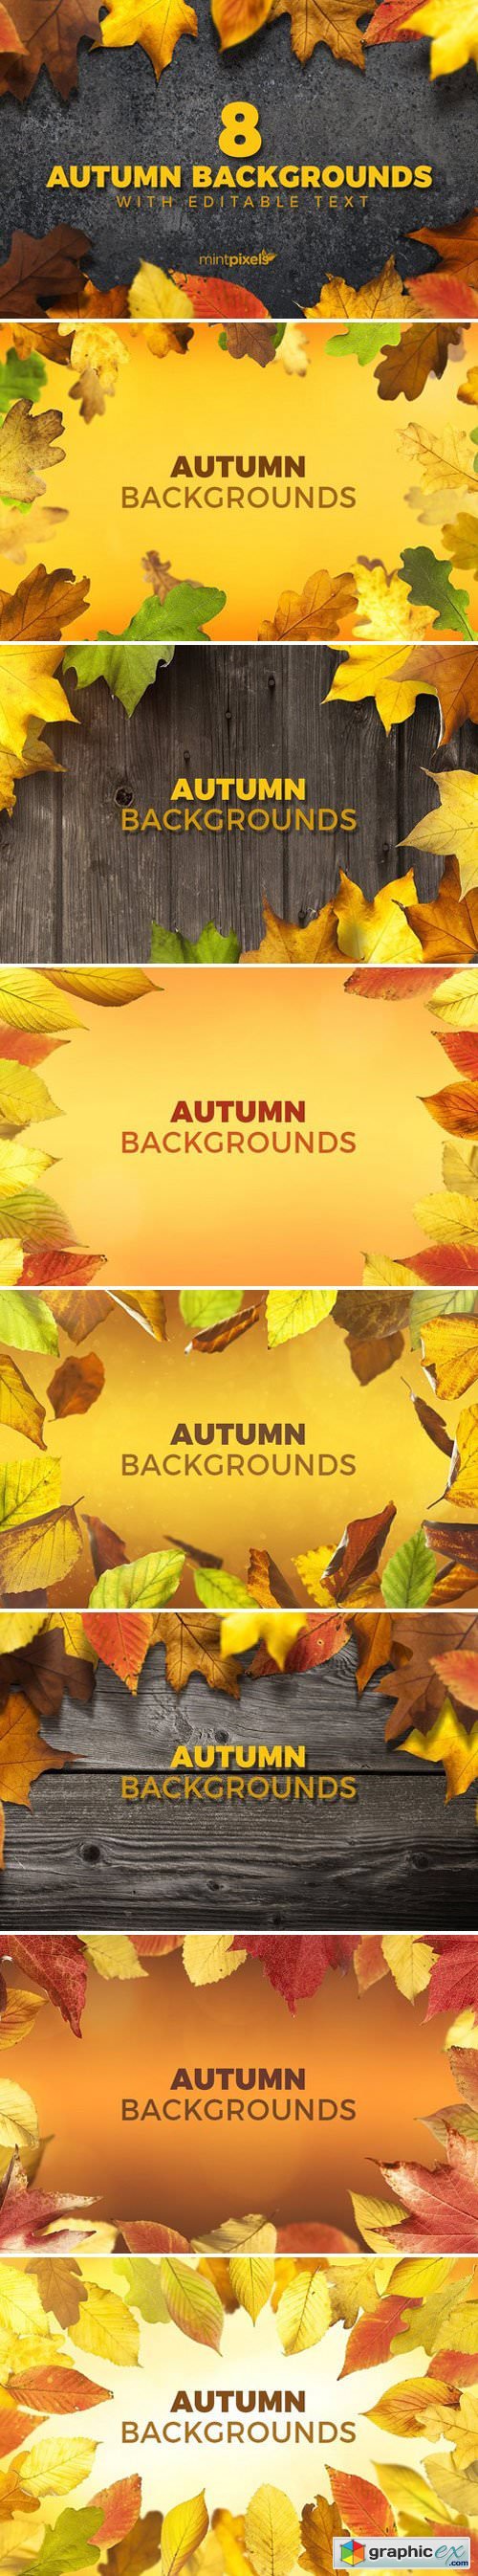 8 Colorful Autumn Backgrounds